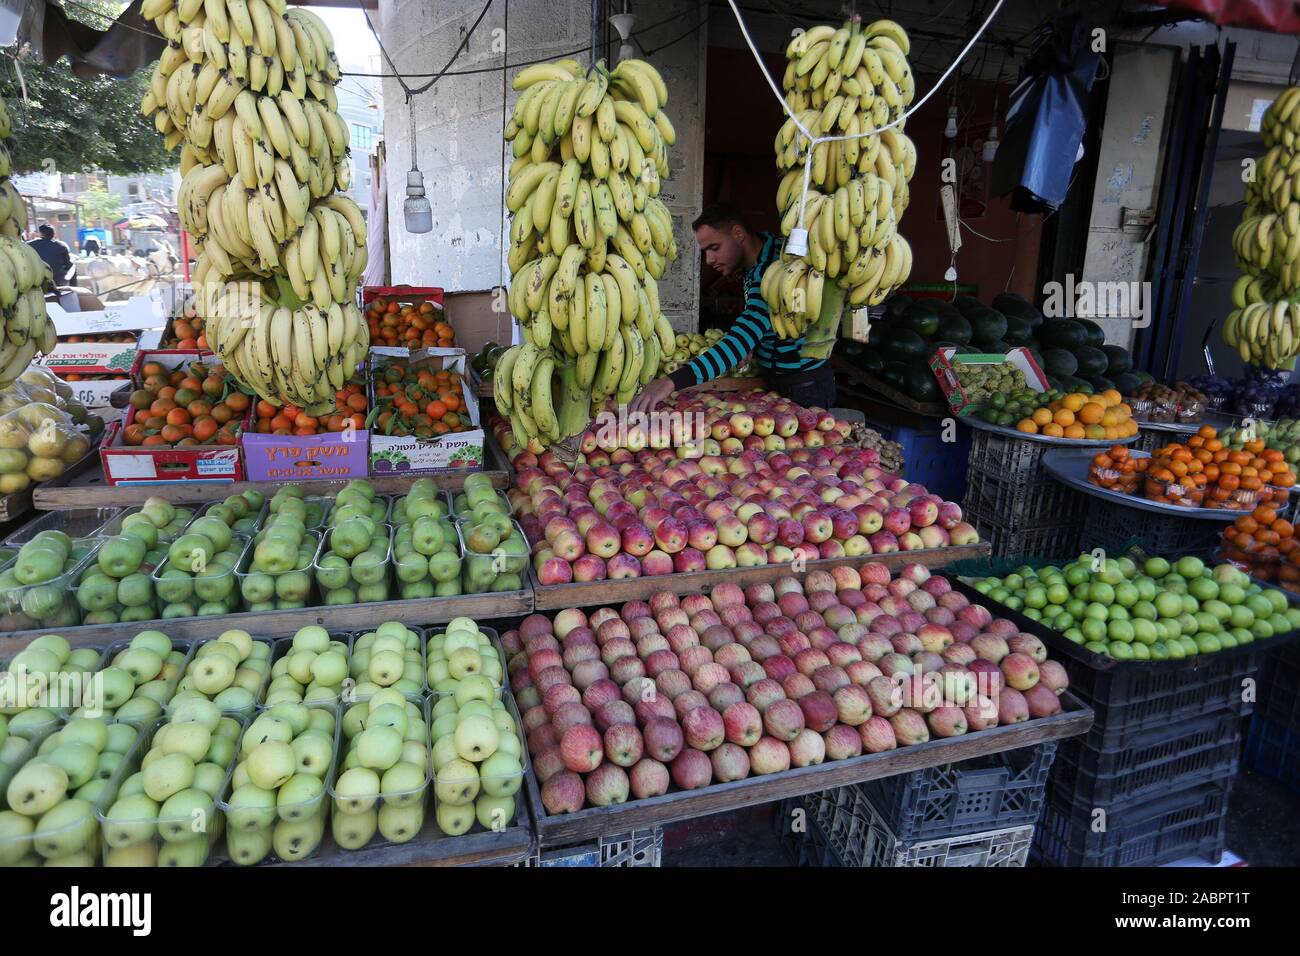 A young Palestinian sells in the market in Khan Younis, southern Gaza Strip, on November 28, 2019. Photo by Abed Rahim Khatib/Alamy Stock Photo